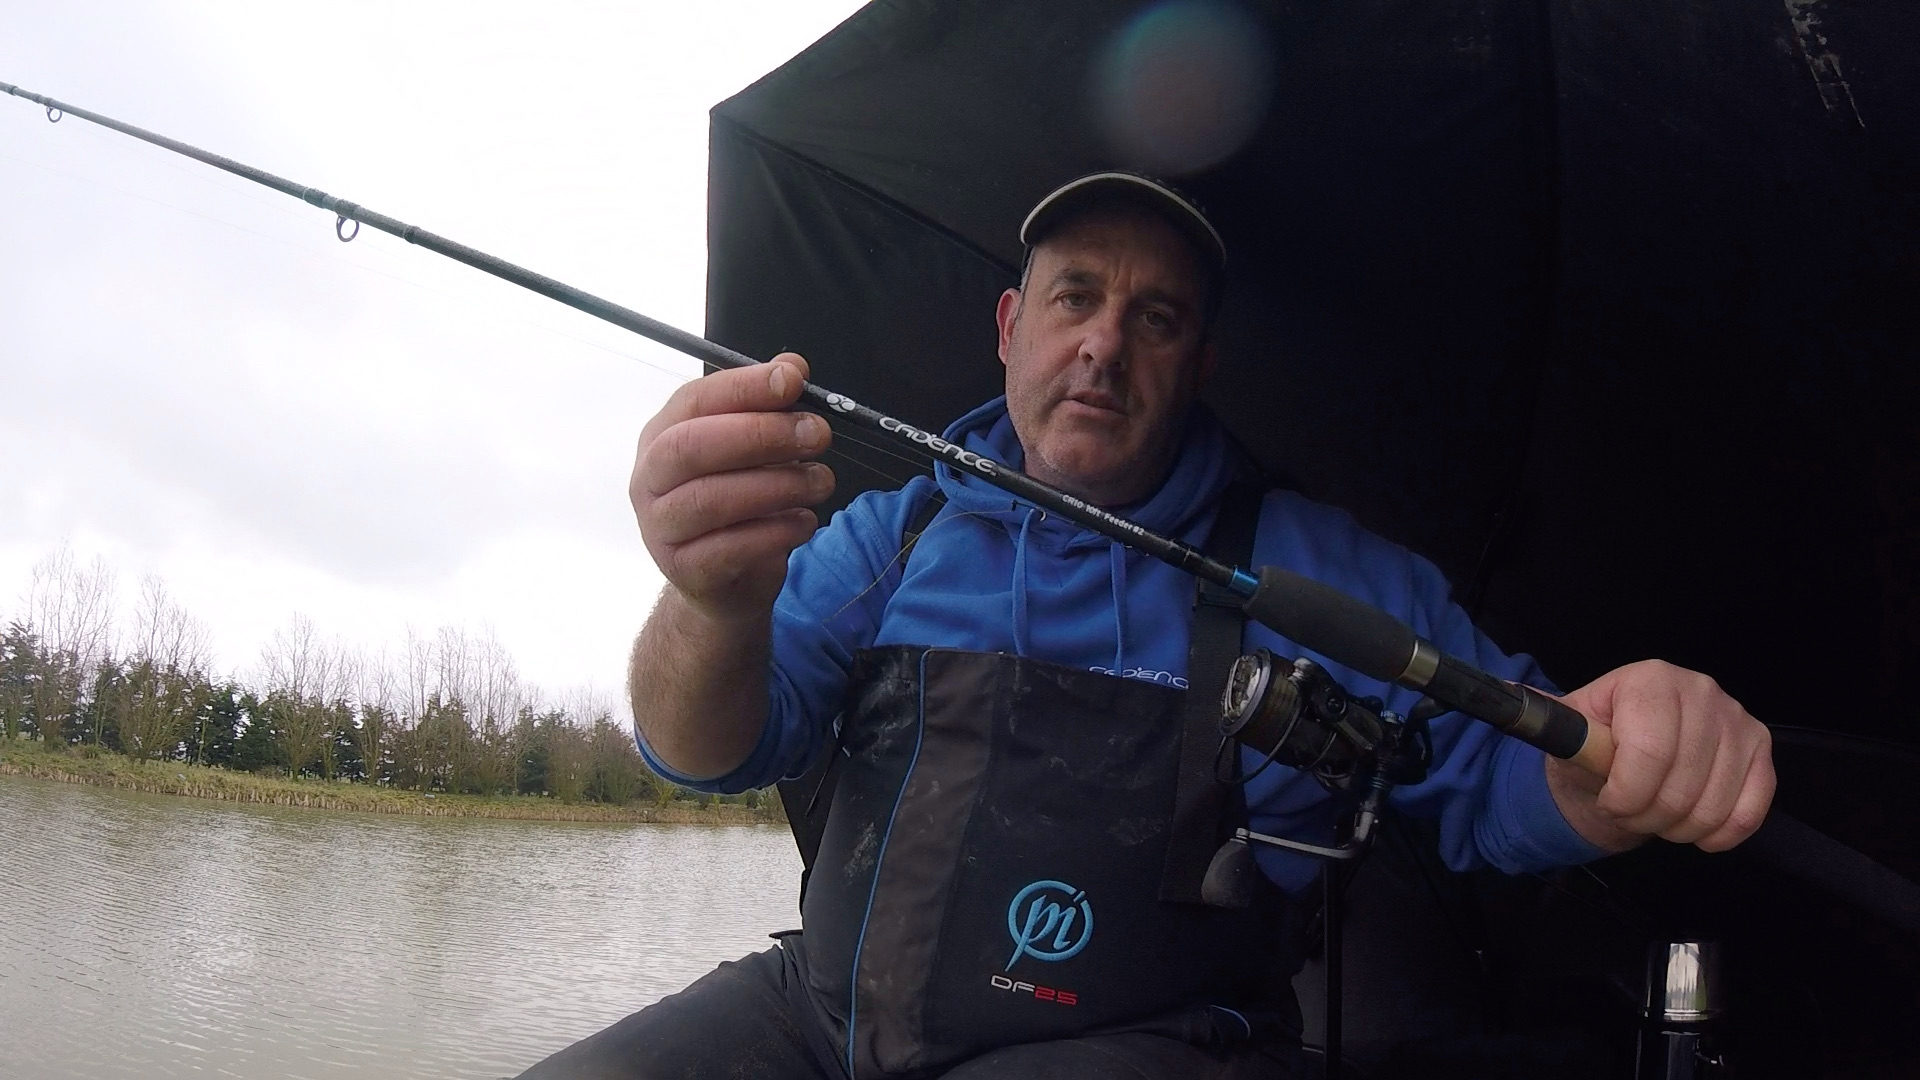 Steven Cowley on the Cadence CR10 10ft and 11ft Feeder Rods - Cadence  Fishing Blog - Coarse Fishing Articles